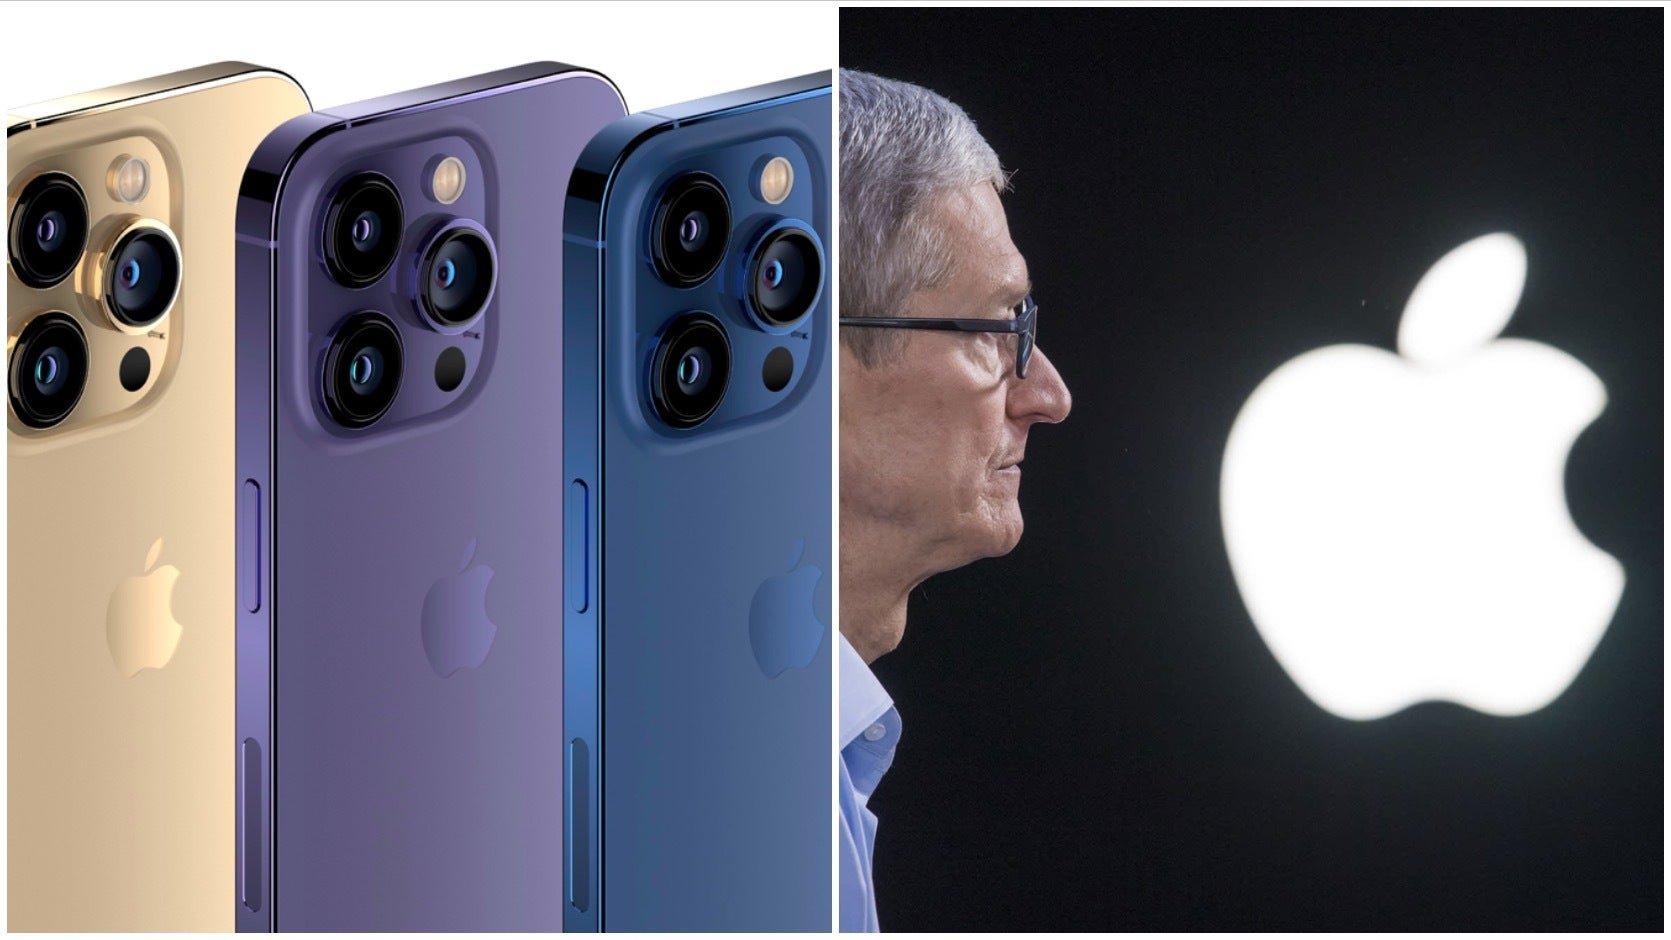 iPhone 14 Pro 84MP camera system: Finally, the first iPhone camera that deserves the “Pro” name?